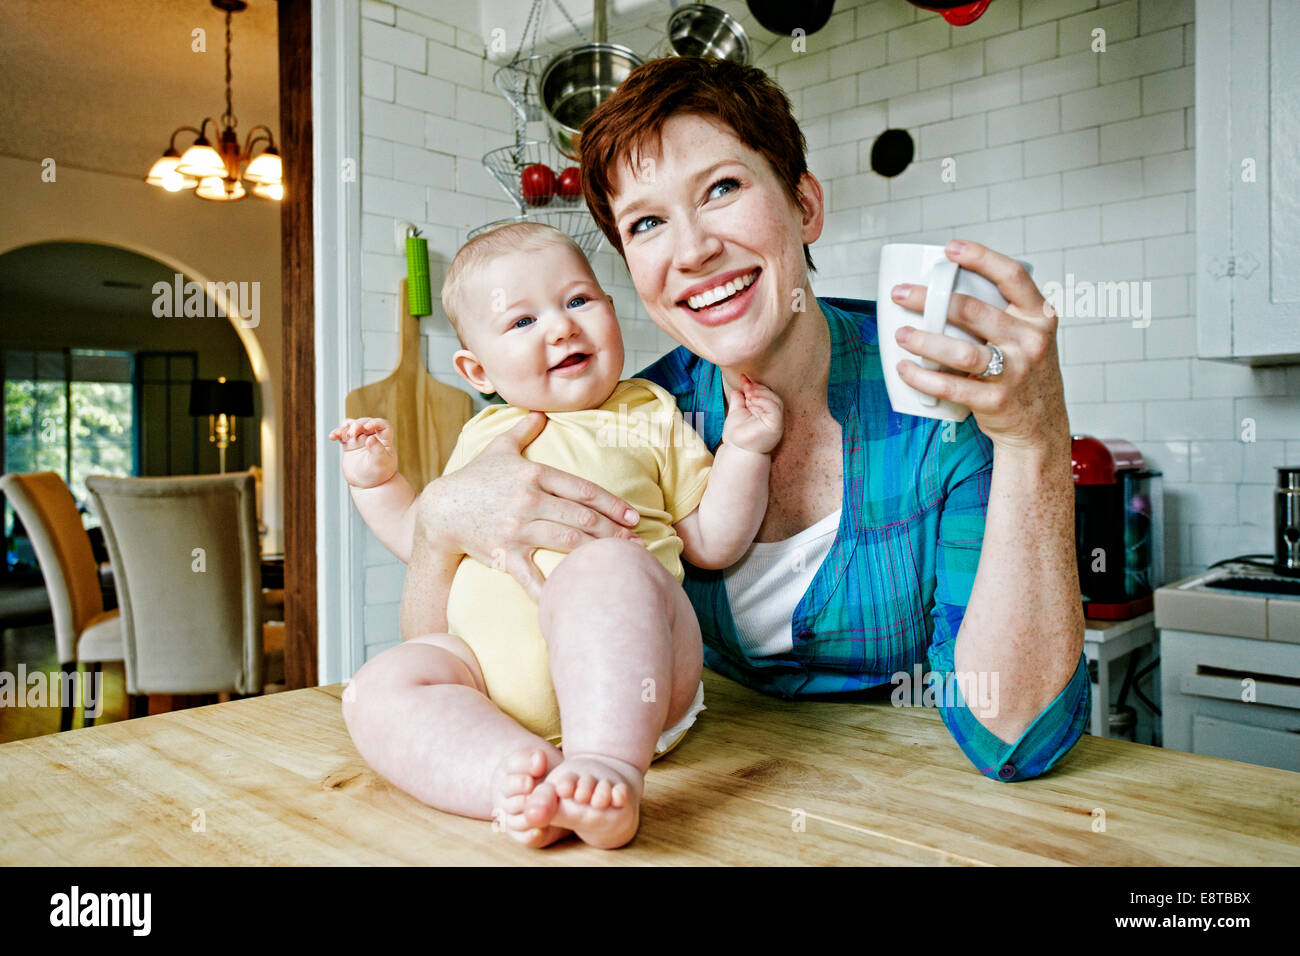 Caucasian mother and baby relaxing in kitchen Stock Photo